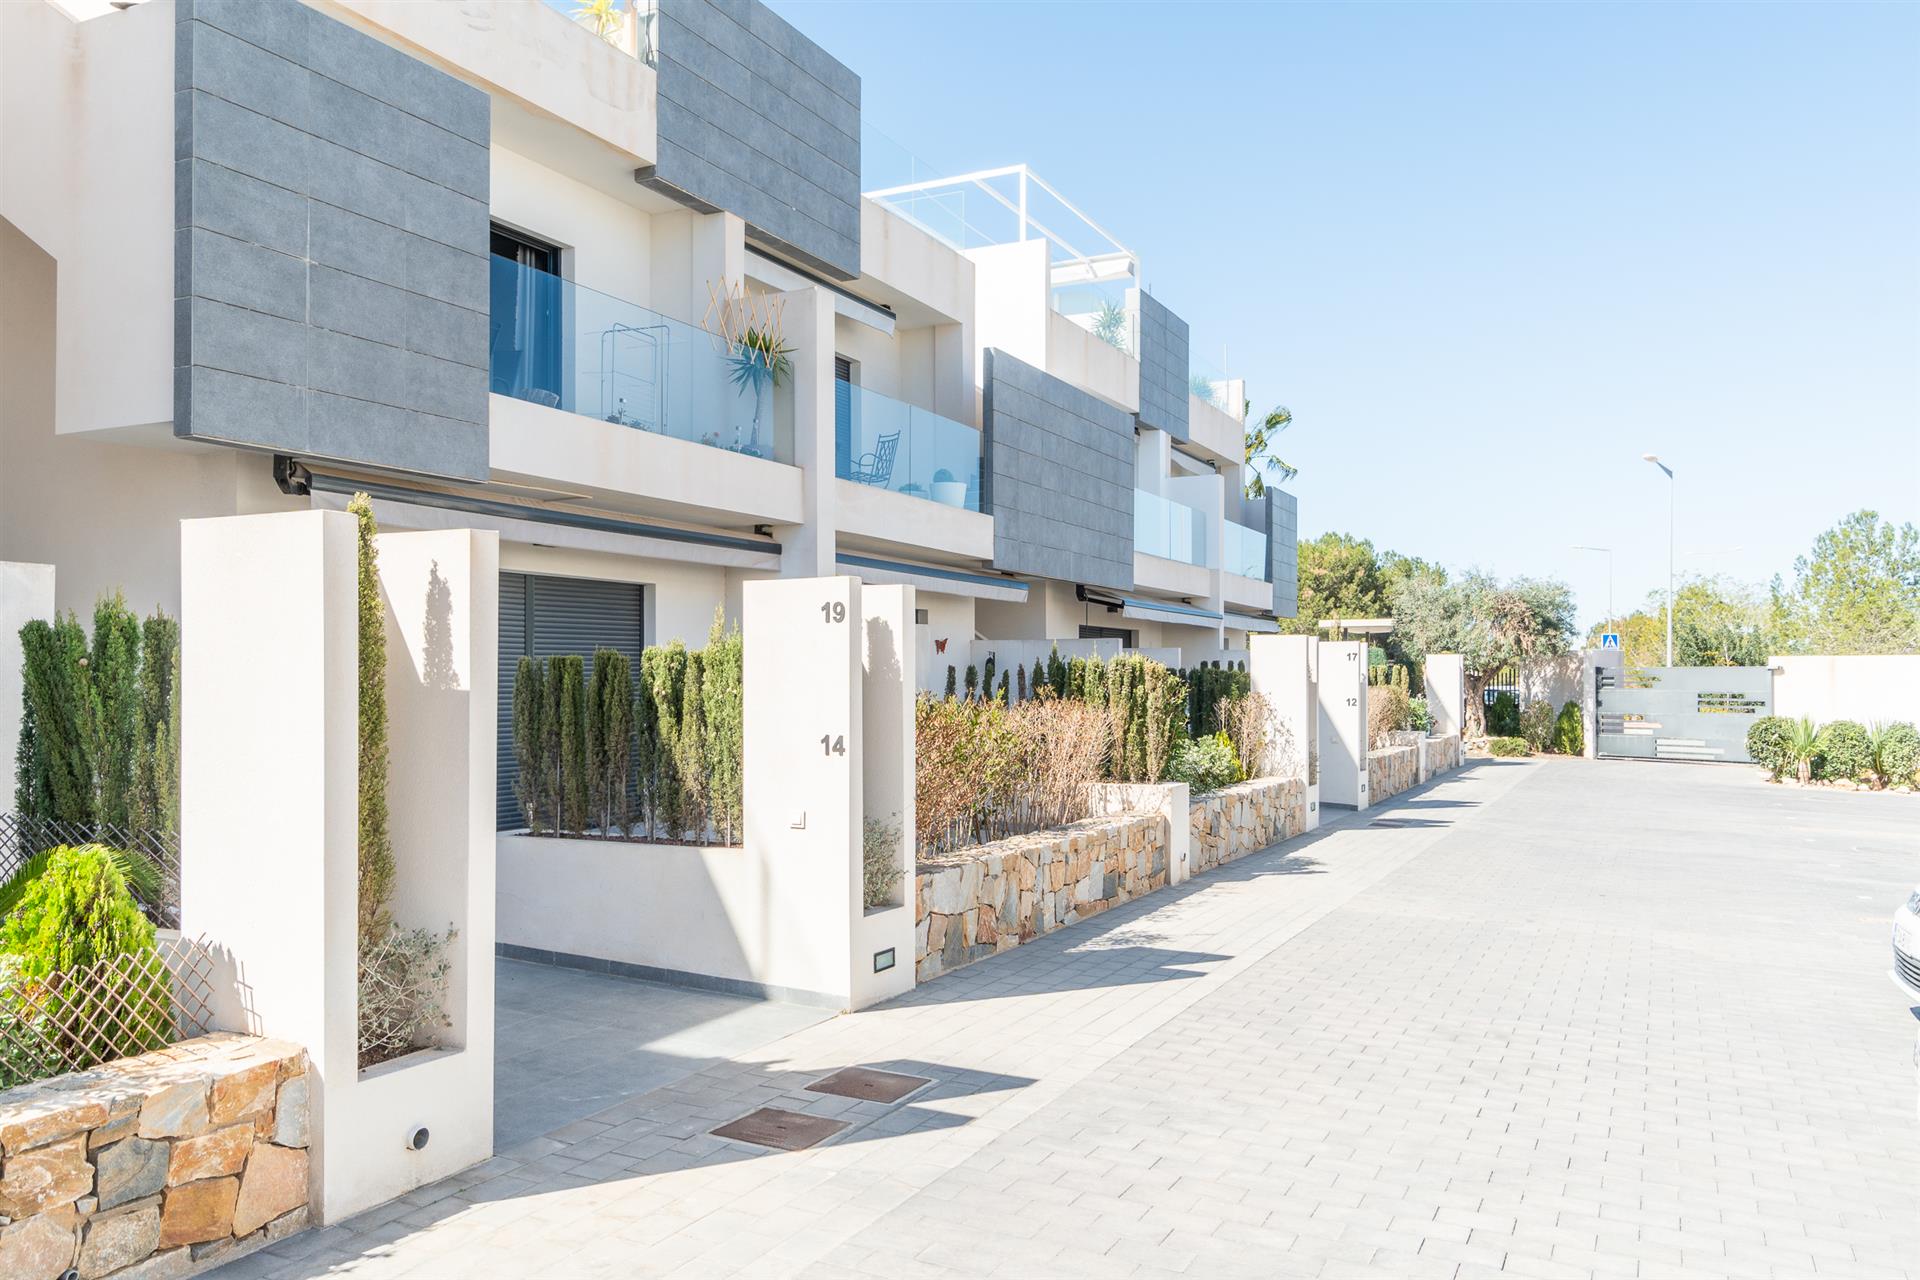 Amazing bungalows in Torrevieja !!!